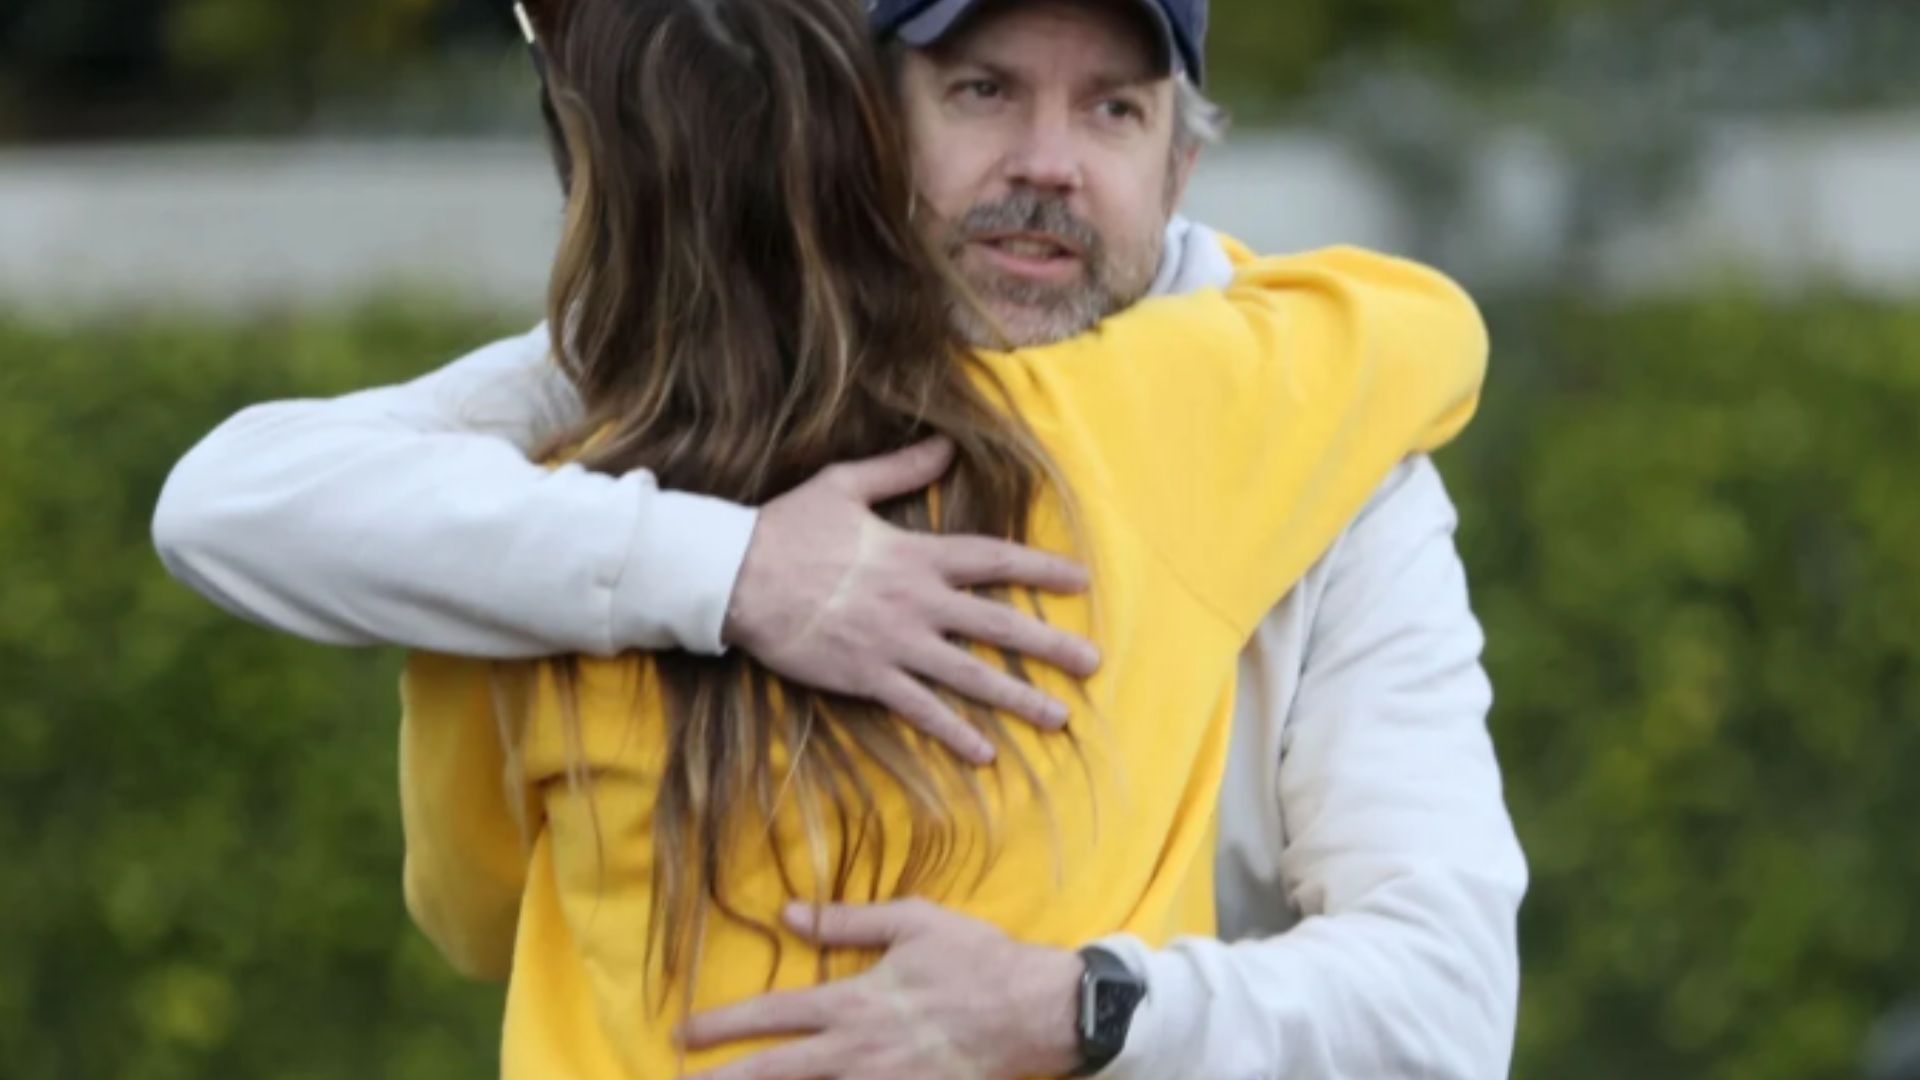 Olivia Wilde and Jason Sudeikis share an amicable embrace in LA